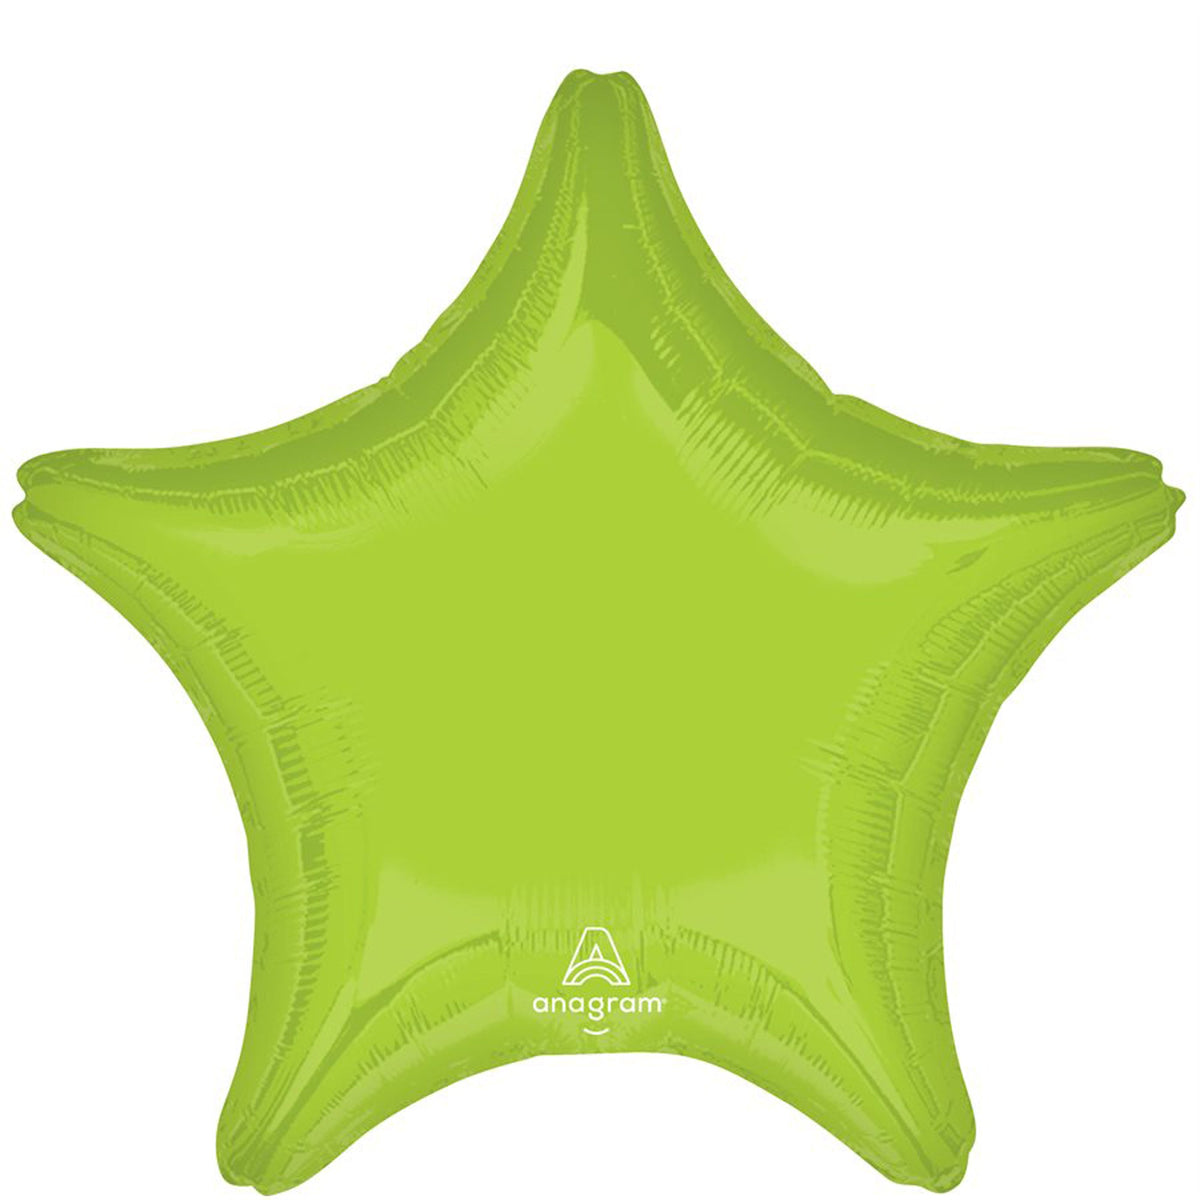 LE GROUPE BLC INTL INC Balloons Vibrant Green Star Shaped Balloon, 18 Inches, 1 Count 026635471169